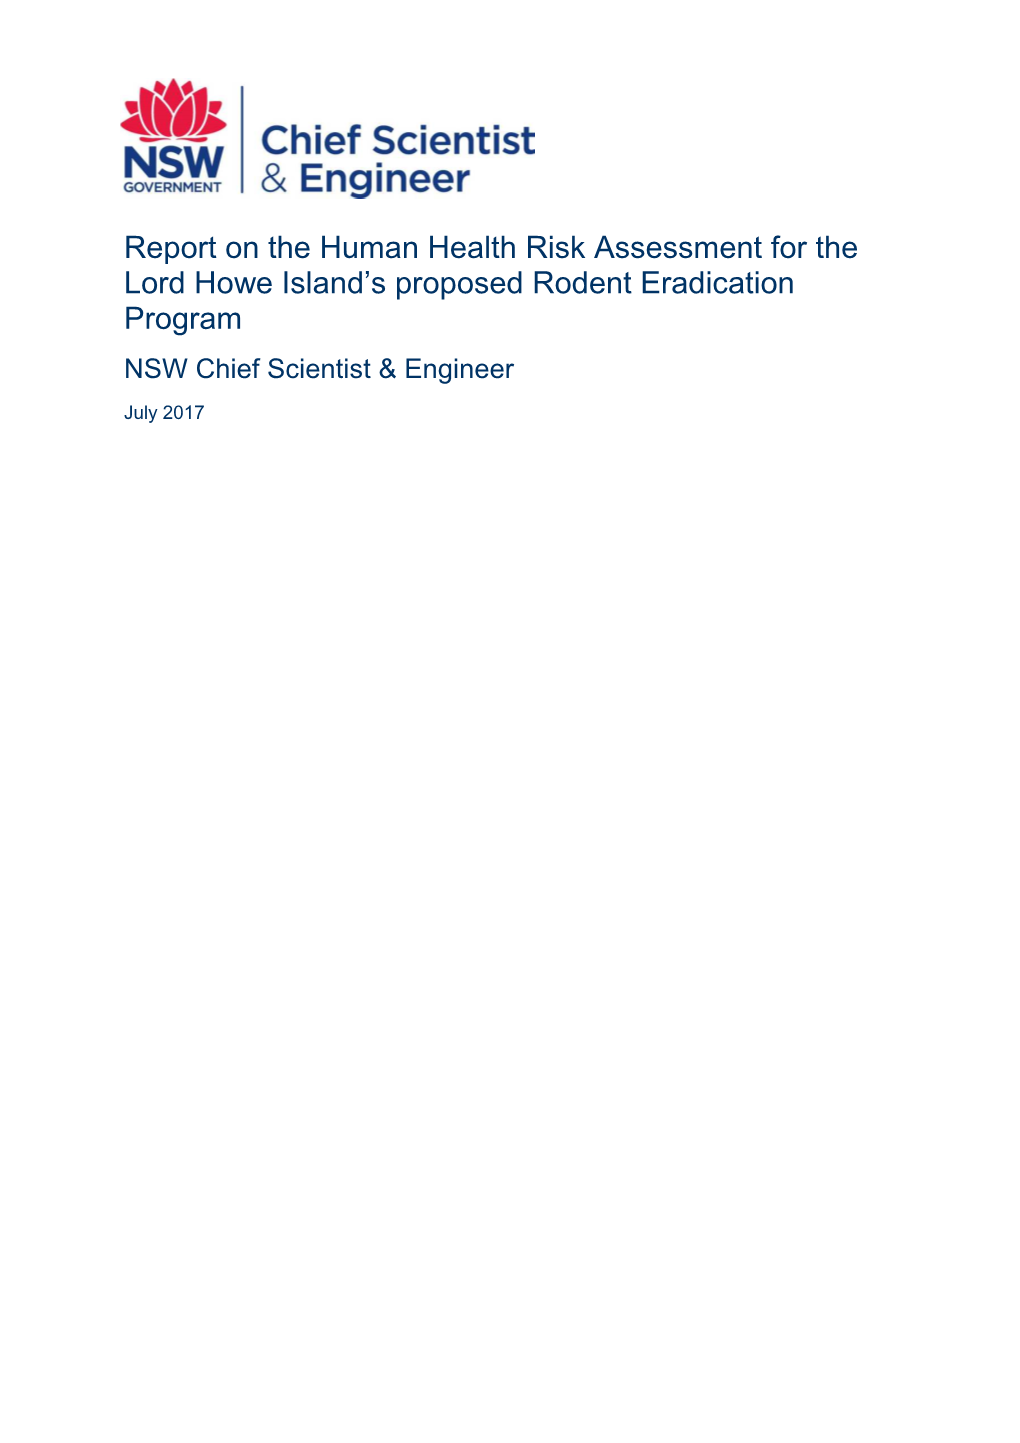 Report on the Human Health Risk Assessment for the Lord Howe Island’S Proposed Rodent Eradication Program NSW Chief Scientist & Engineer